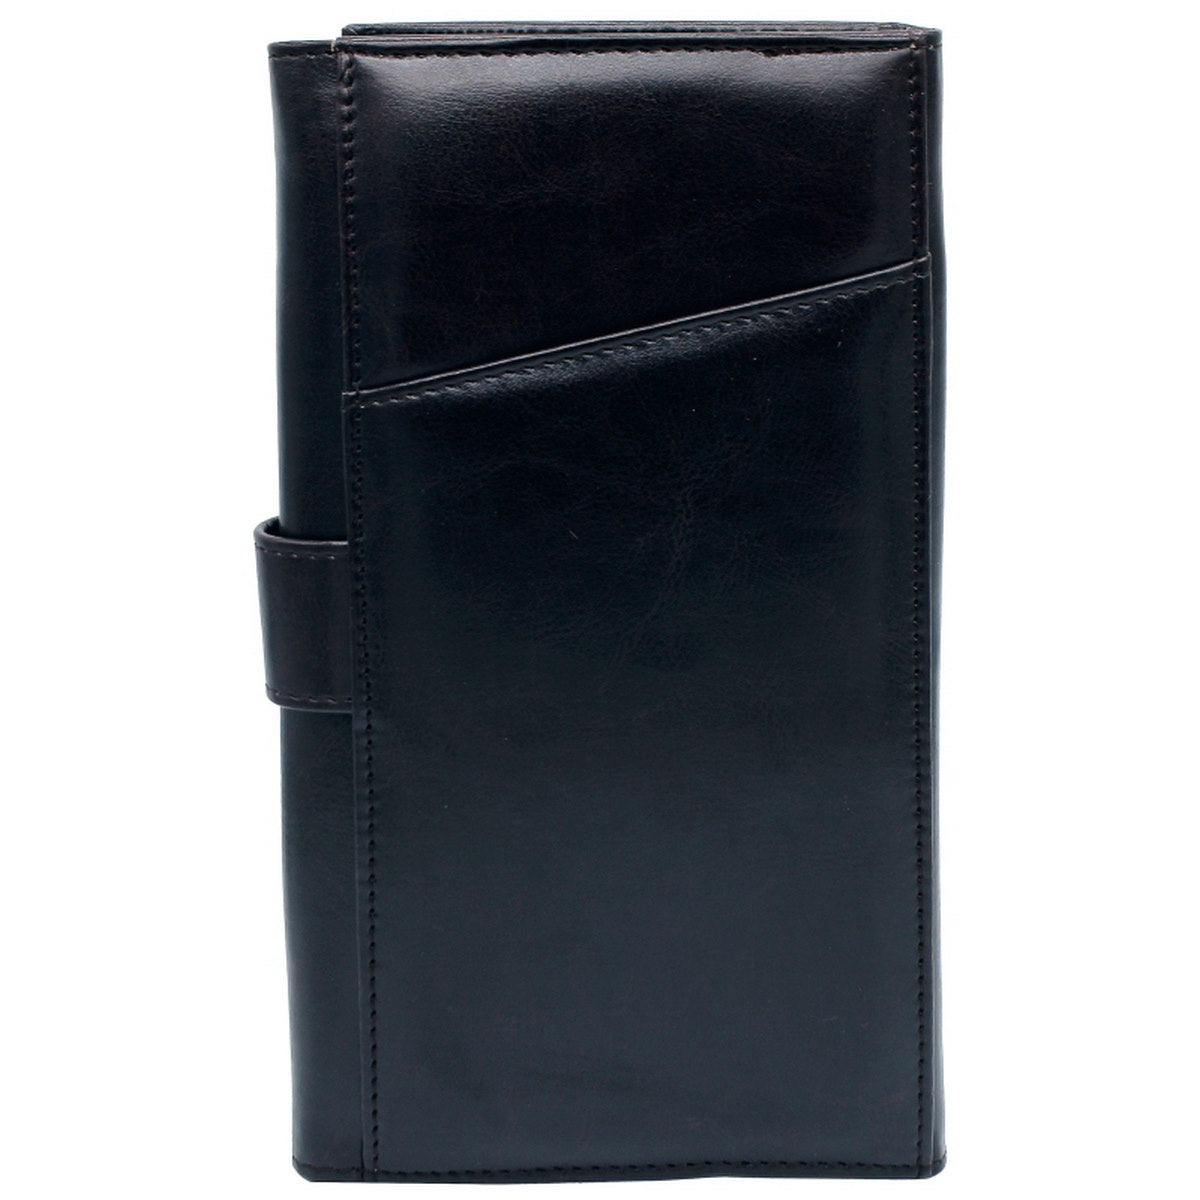 Brown Leatherette Passport Holder - Gifts for Travelers, Travel Companies, Personal or Corporate Gifting JAPH07BN